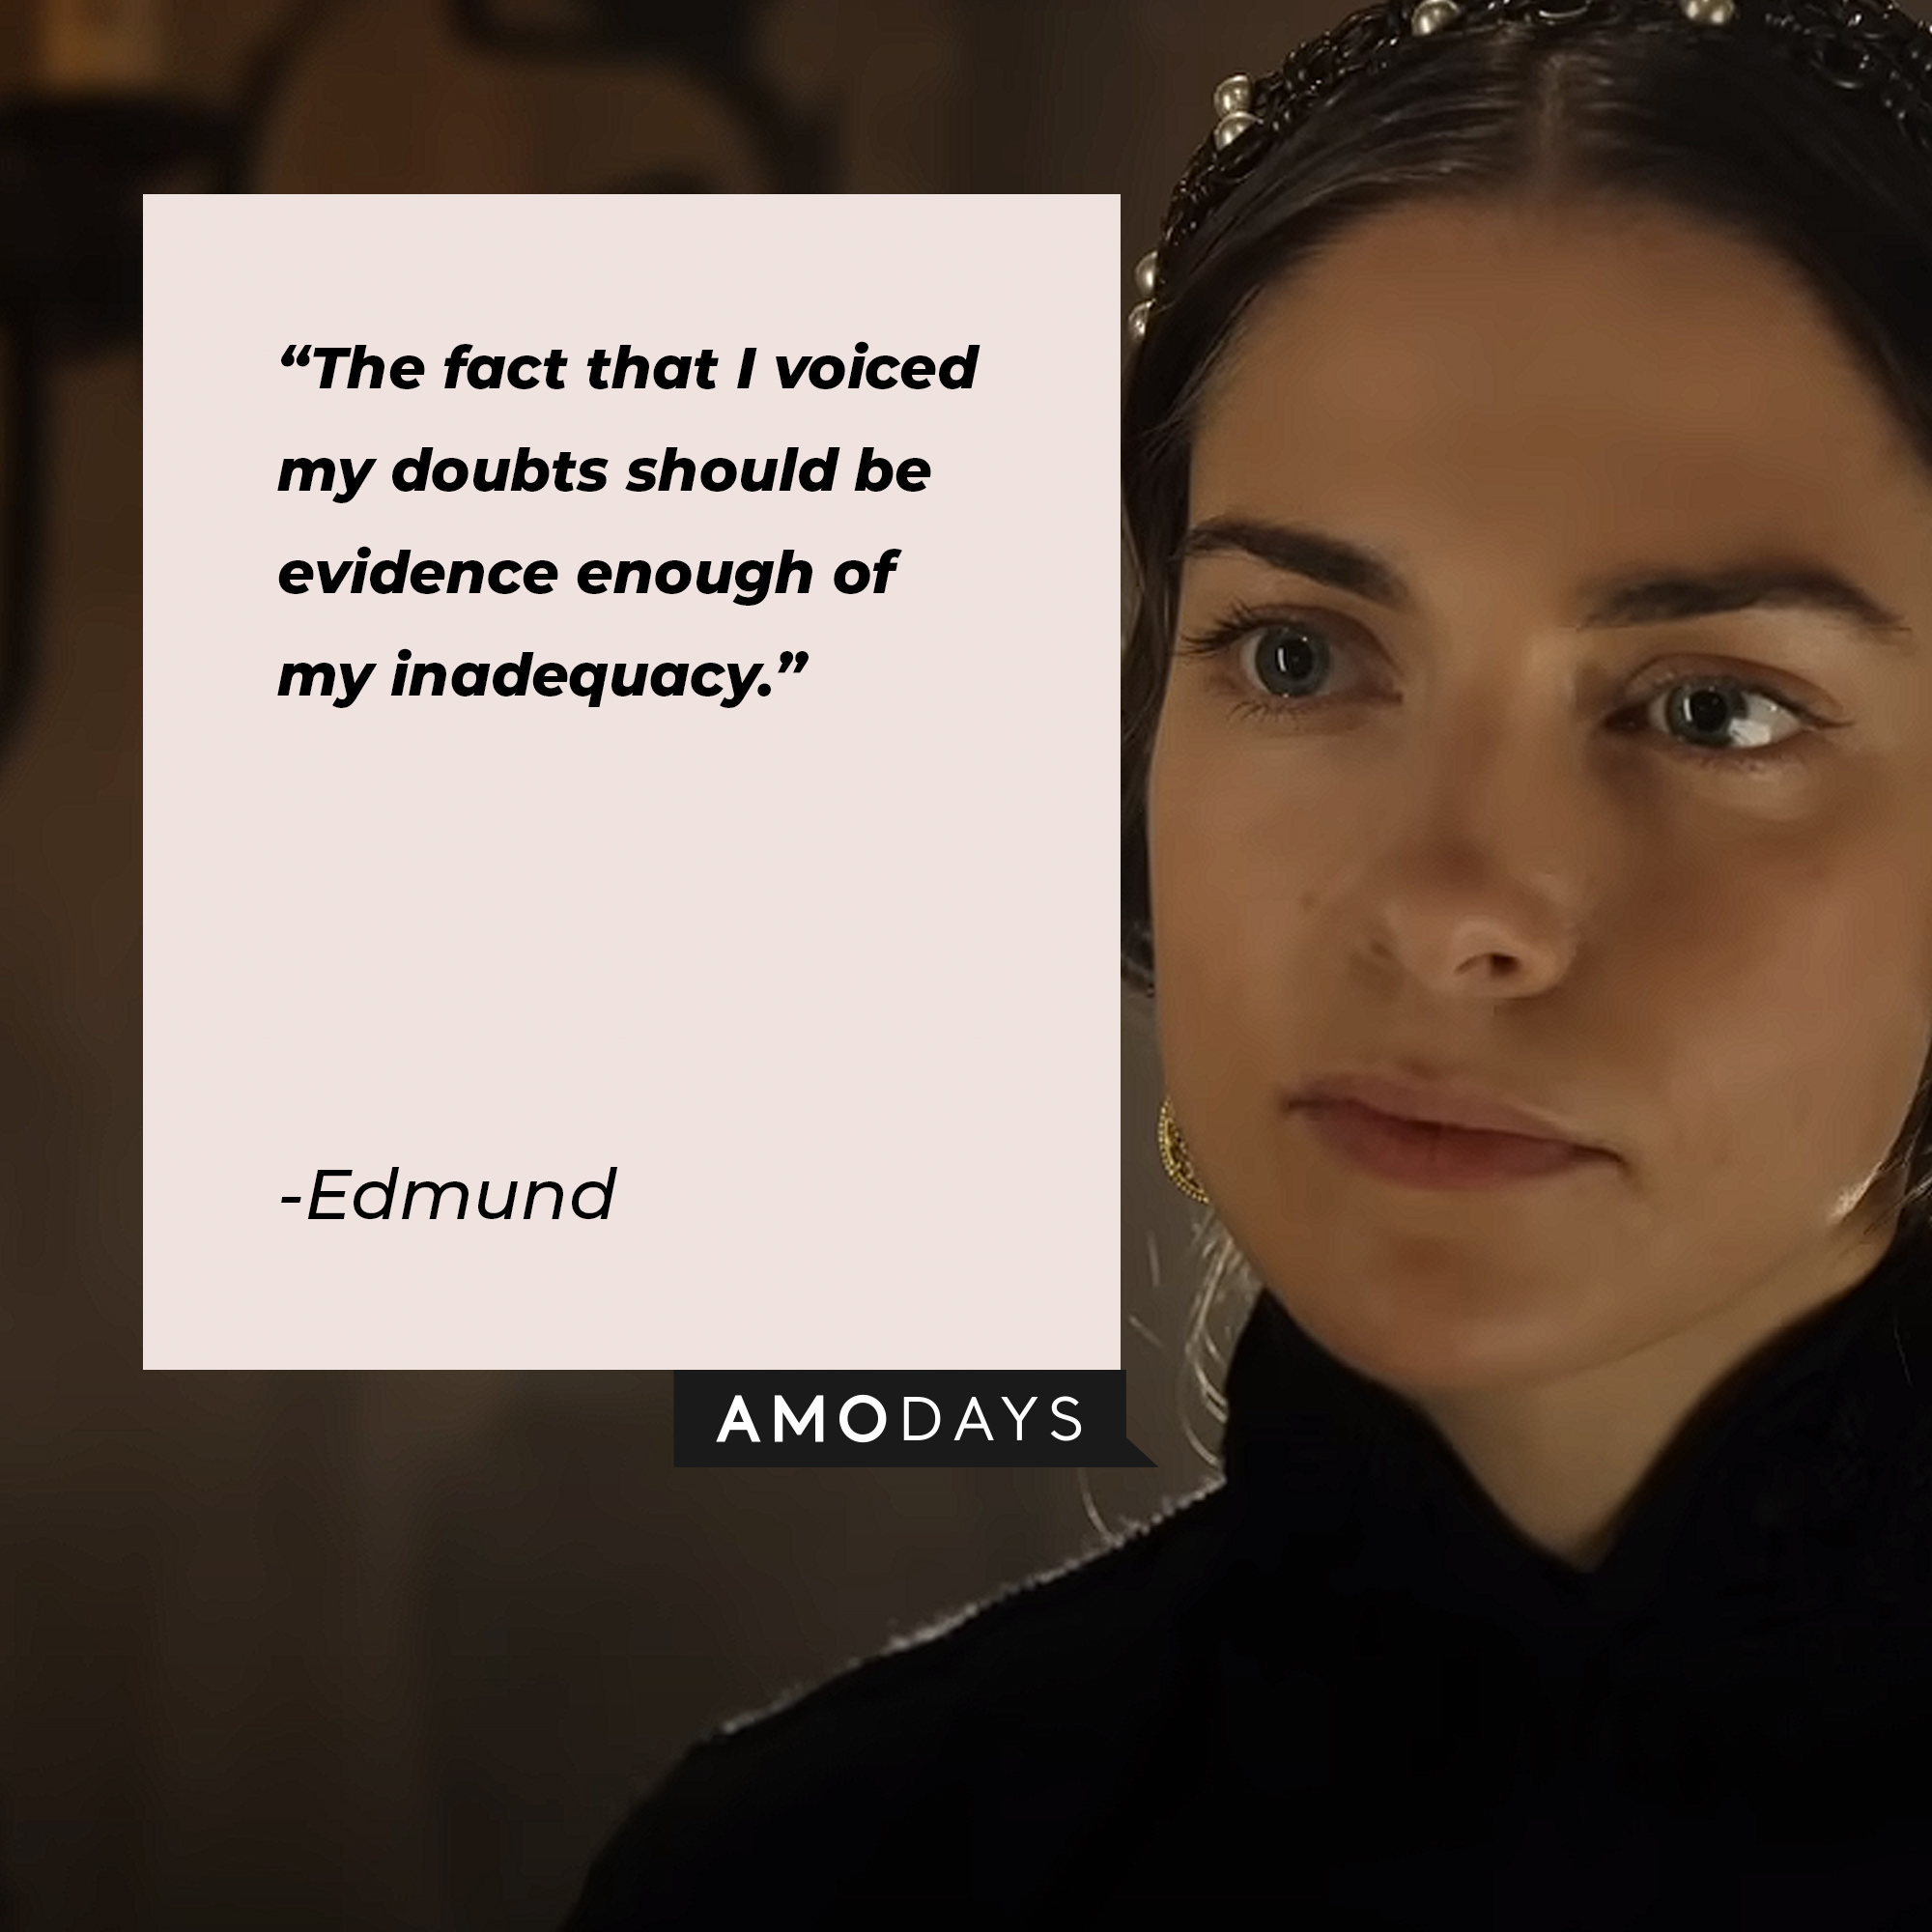 Edmund's quote: "The fact that I voiced my doubts should be evidence enough of my inadequacy." | Image: youtube.com/Netflix